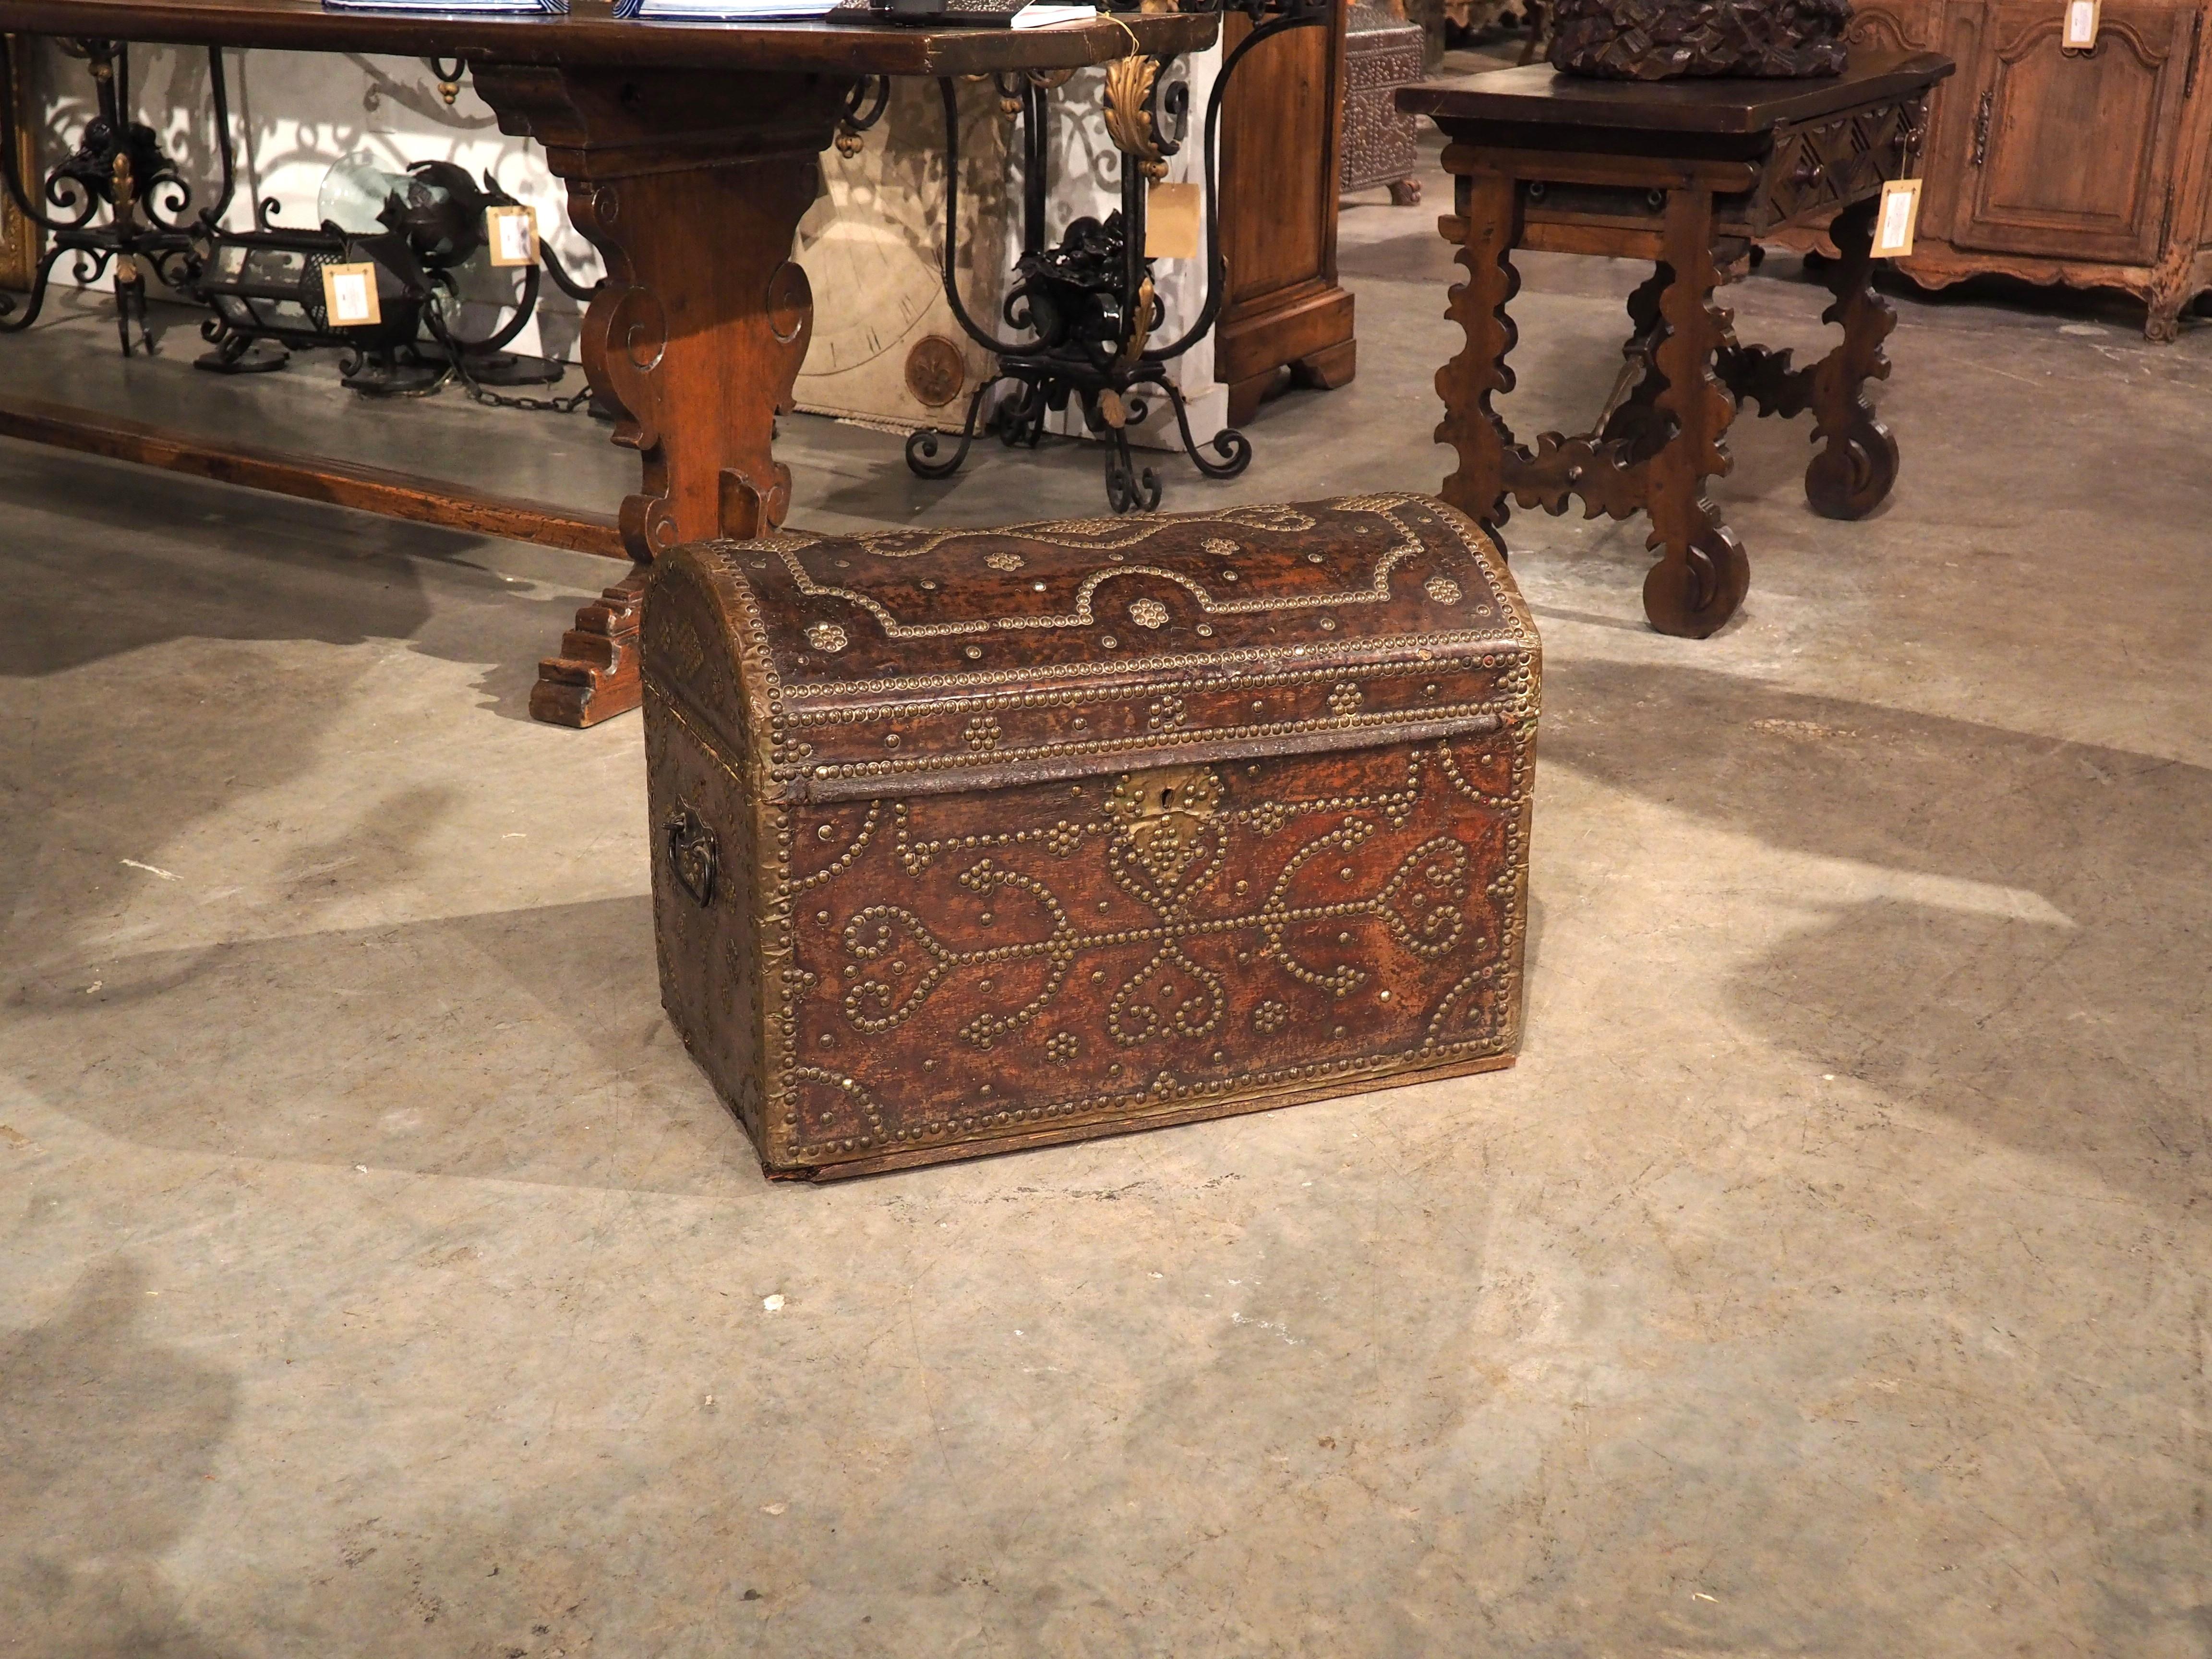 Beautifully designed and highly portable, this French domed top trunk was constructed by hand with a wooden body enveloped in chocolate-colored leather. The trunk, which dates to the 1700s, also features meticulously placed nailheads forming